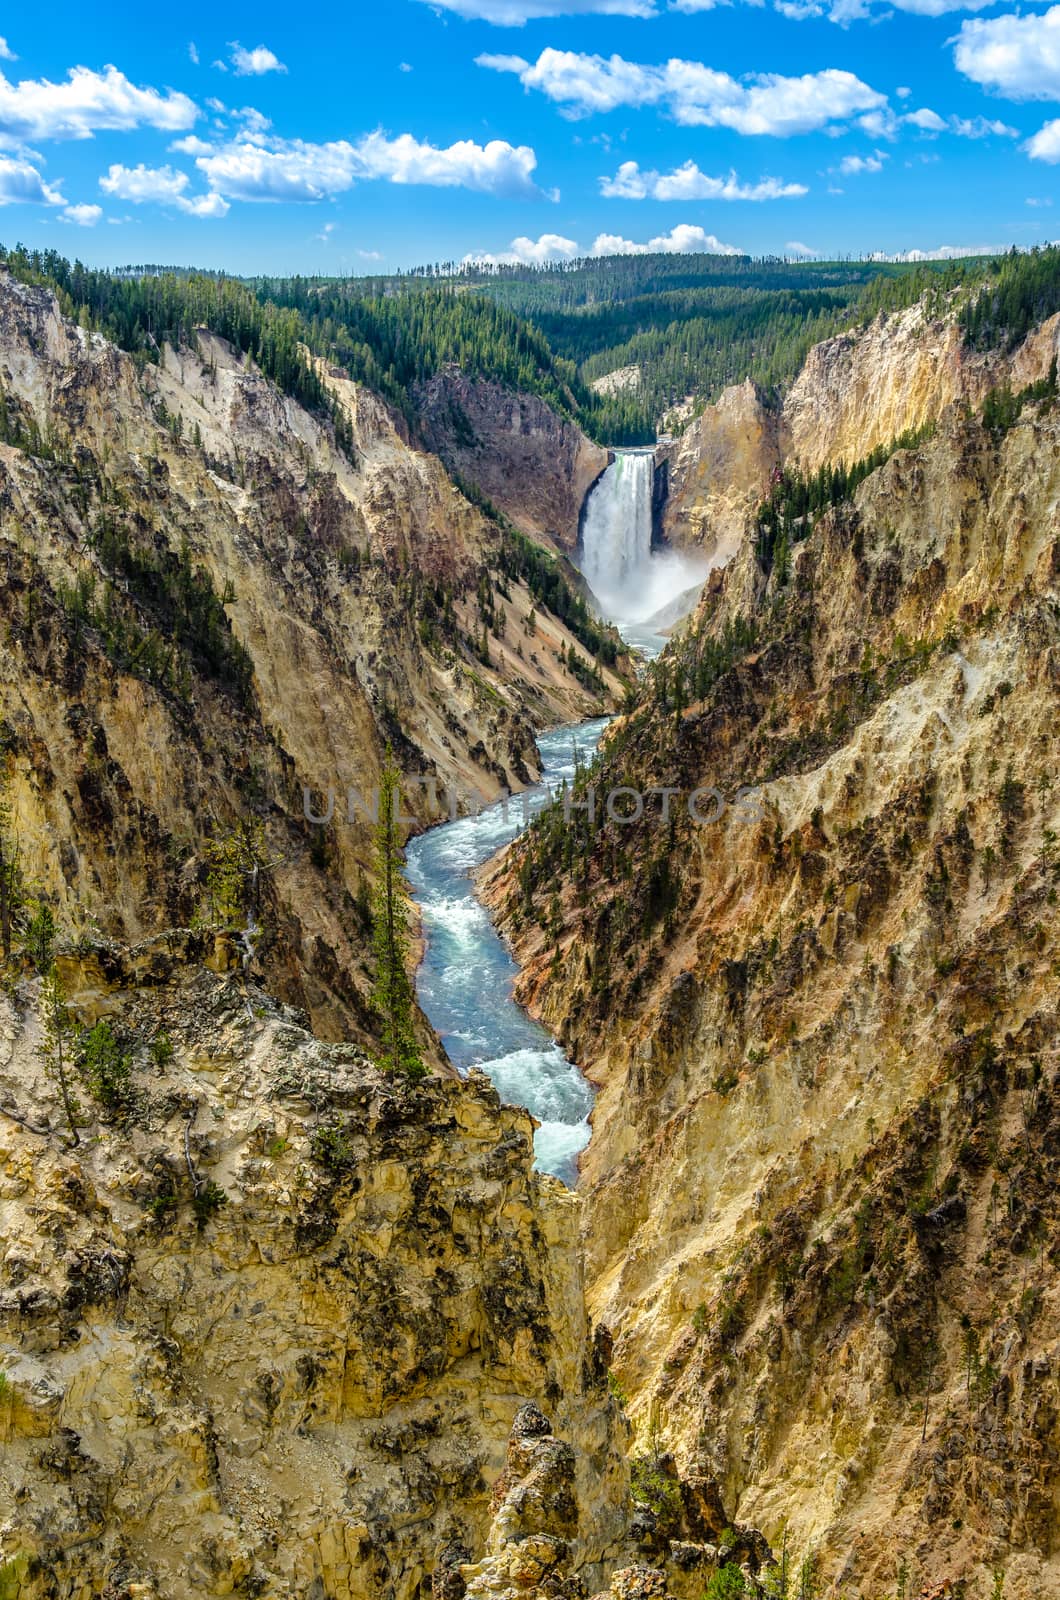 Landscape view at Grand canyon of Yellowstone, USA by martinm303